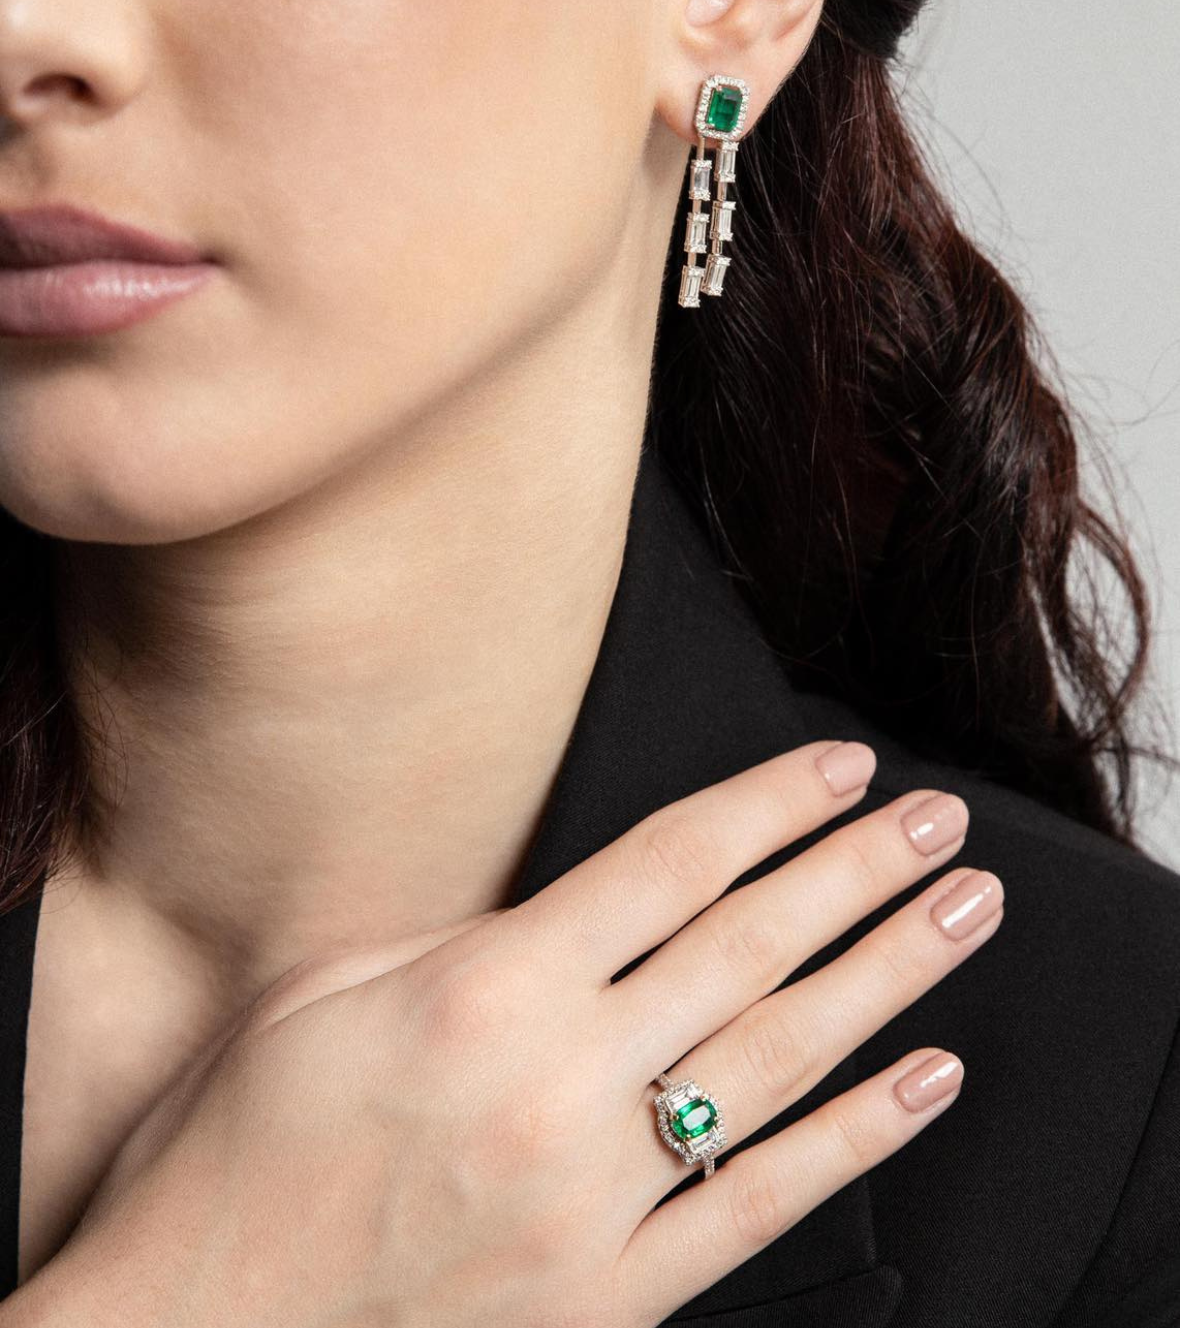 White Gold Earring with Baguette Diamonds and Emerald 03064 by Mentis Collection 